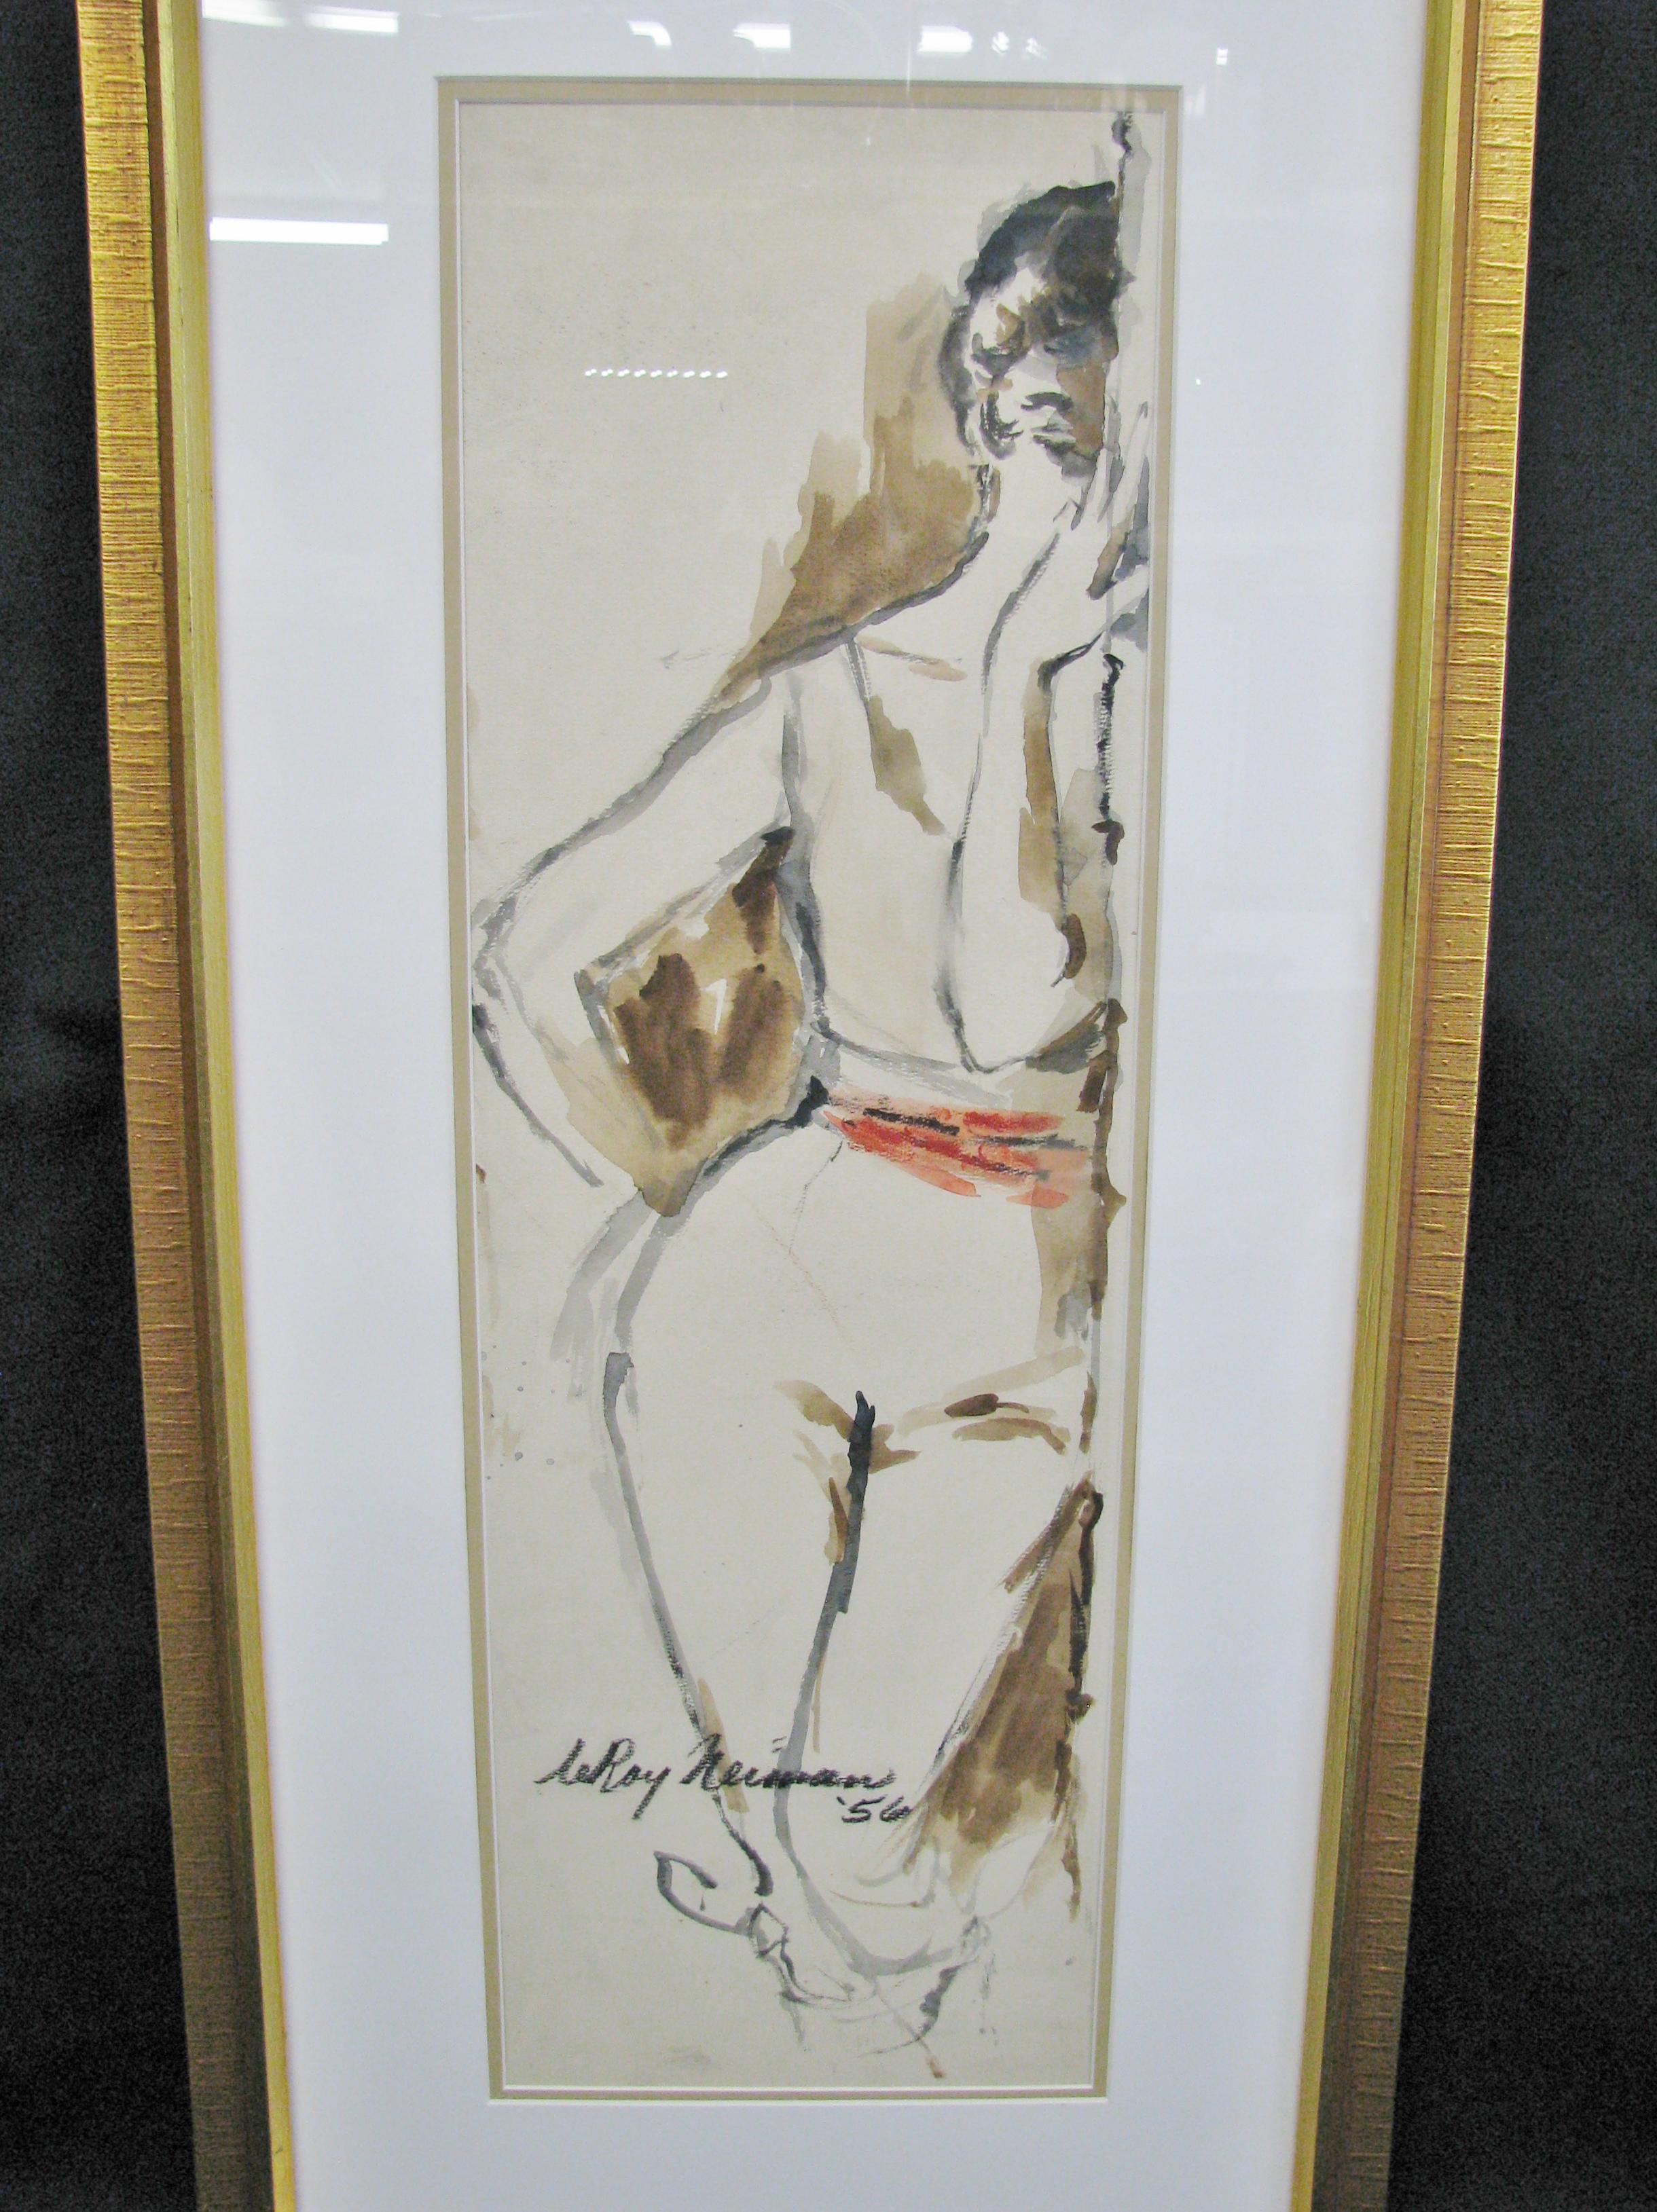 Exceptionally nice original watercolor by Leroy Neiman. Beautifully rendered woman peering around the side of a doorway. The cream, heavy textured paper stock perfectly sets off the muted palette - browns, charcoal and black. This, in turn, is the